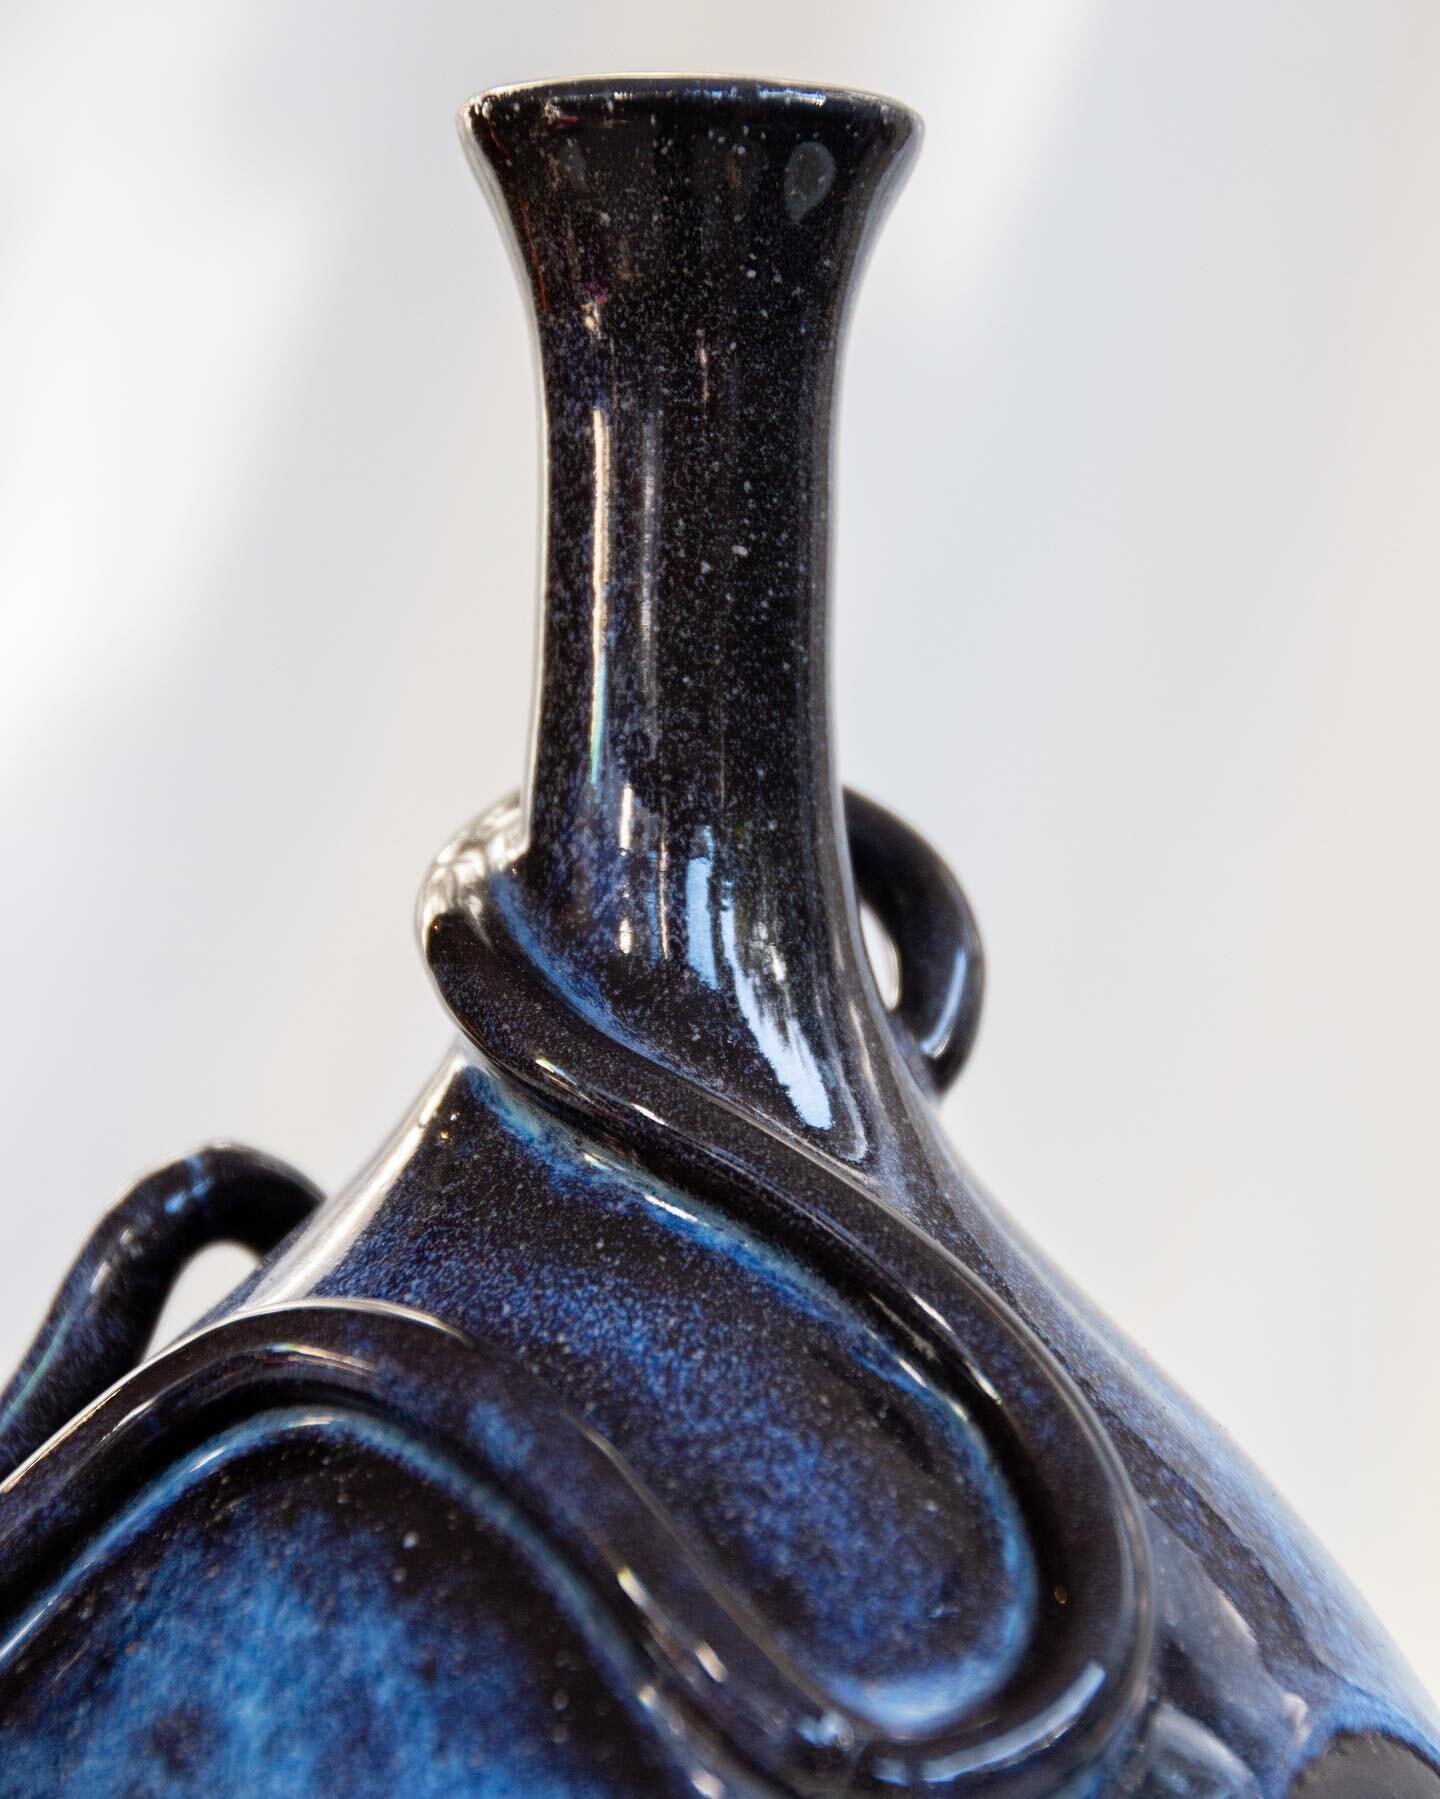 Heres a closeup of one of my free form pieces! I love making the squiggles and watching the glaze ebb and flow around the forms. I cant wait to make some more!